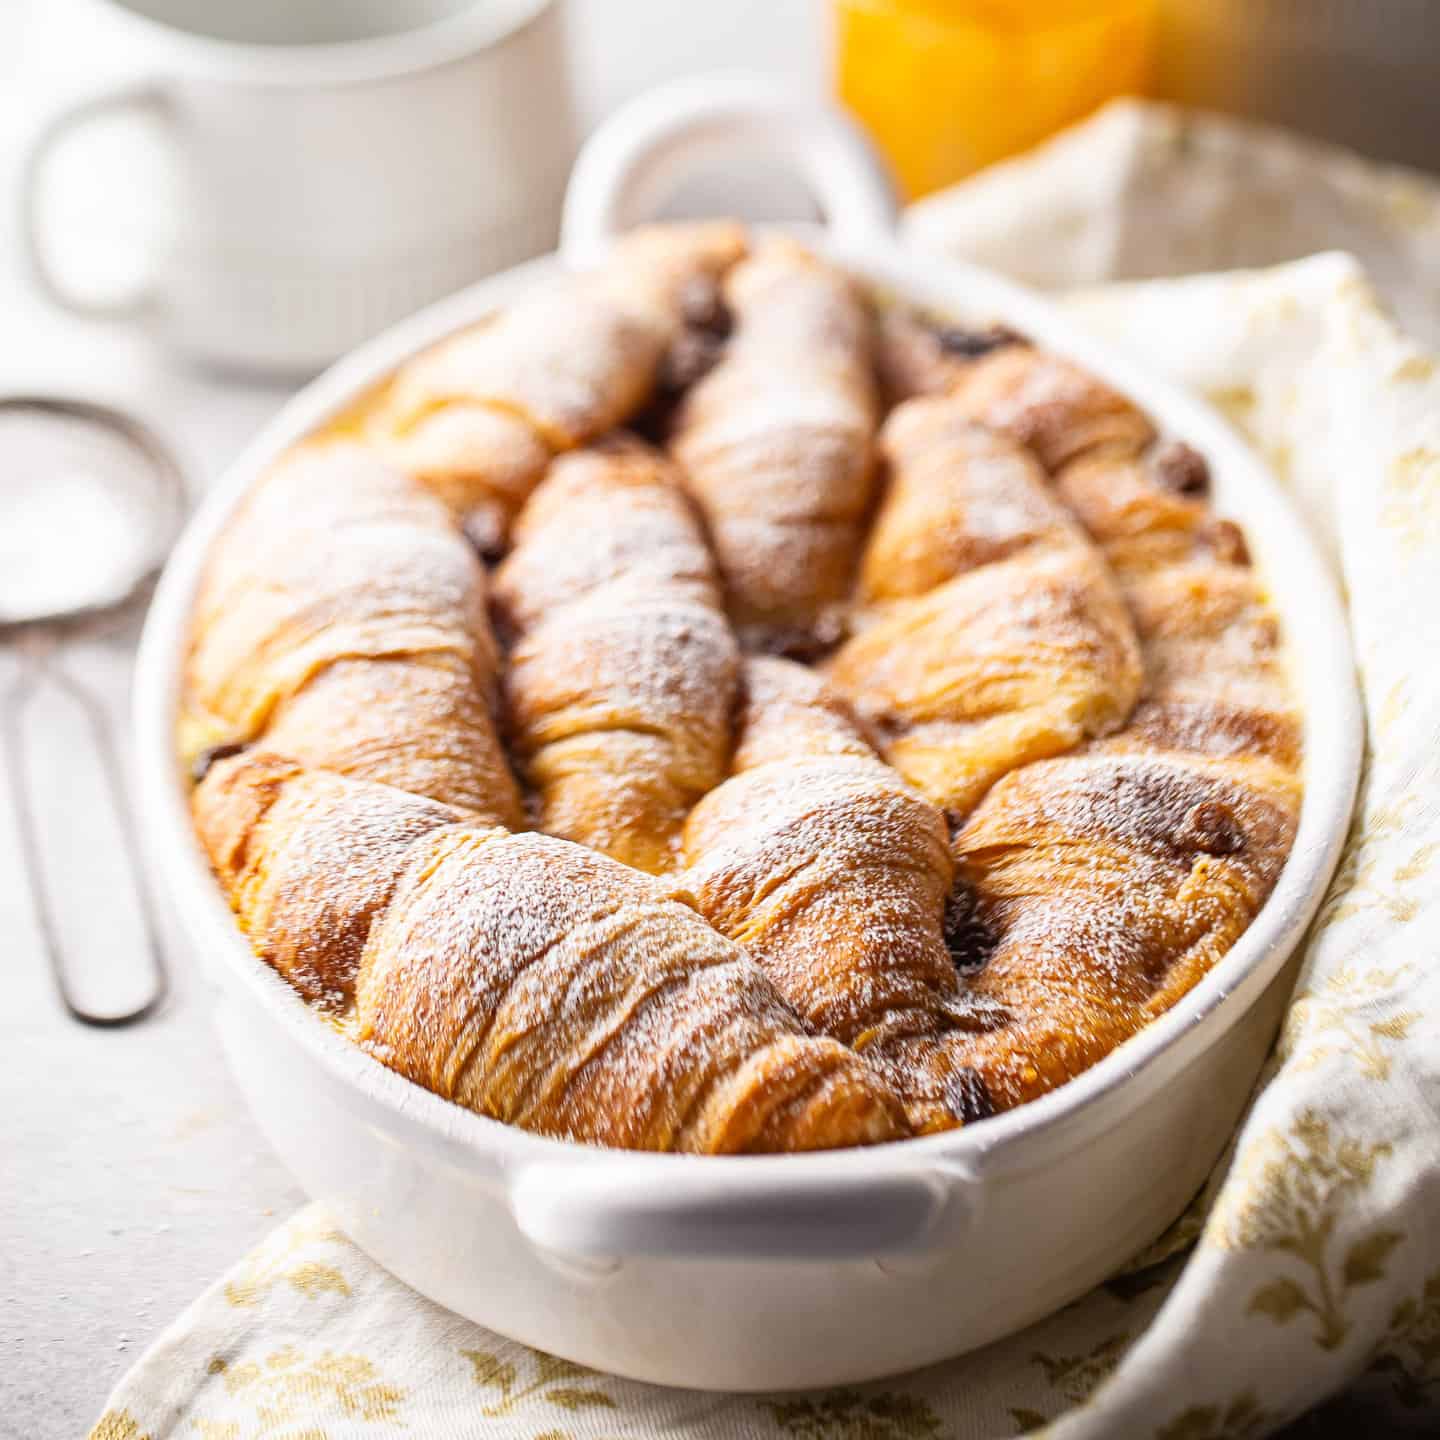 Croissant bread pudding baked in an oval dish with powdered sugar on top.